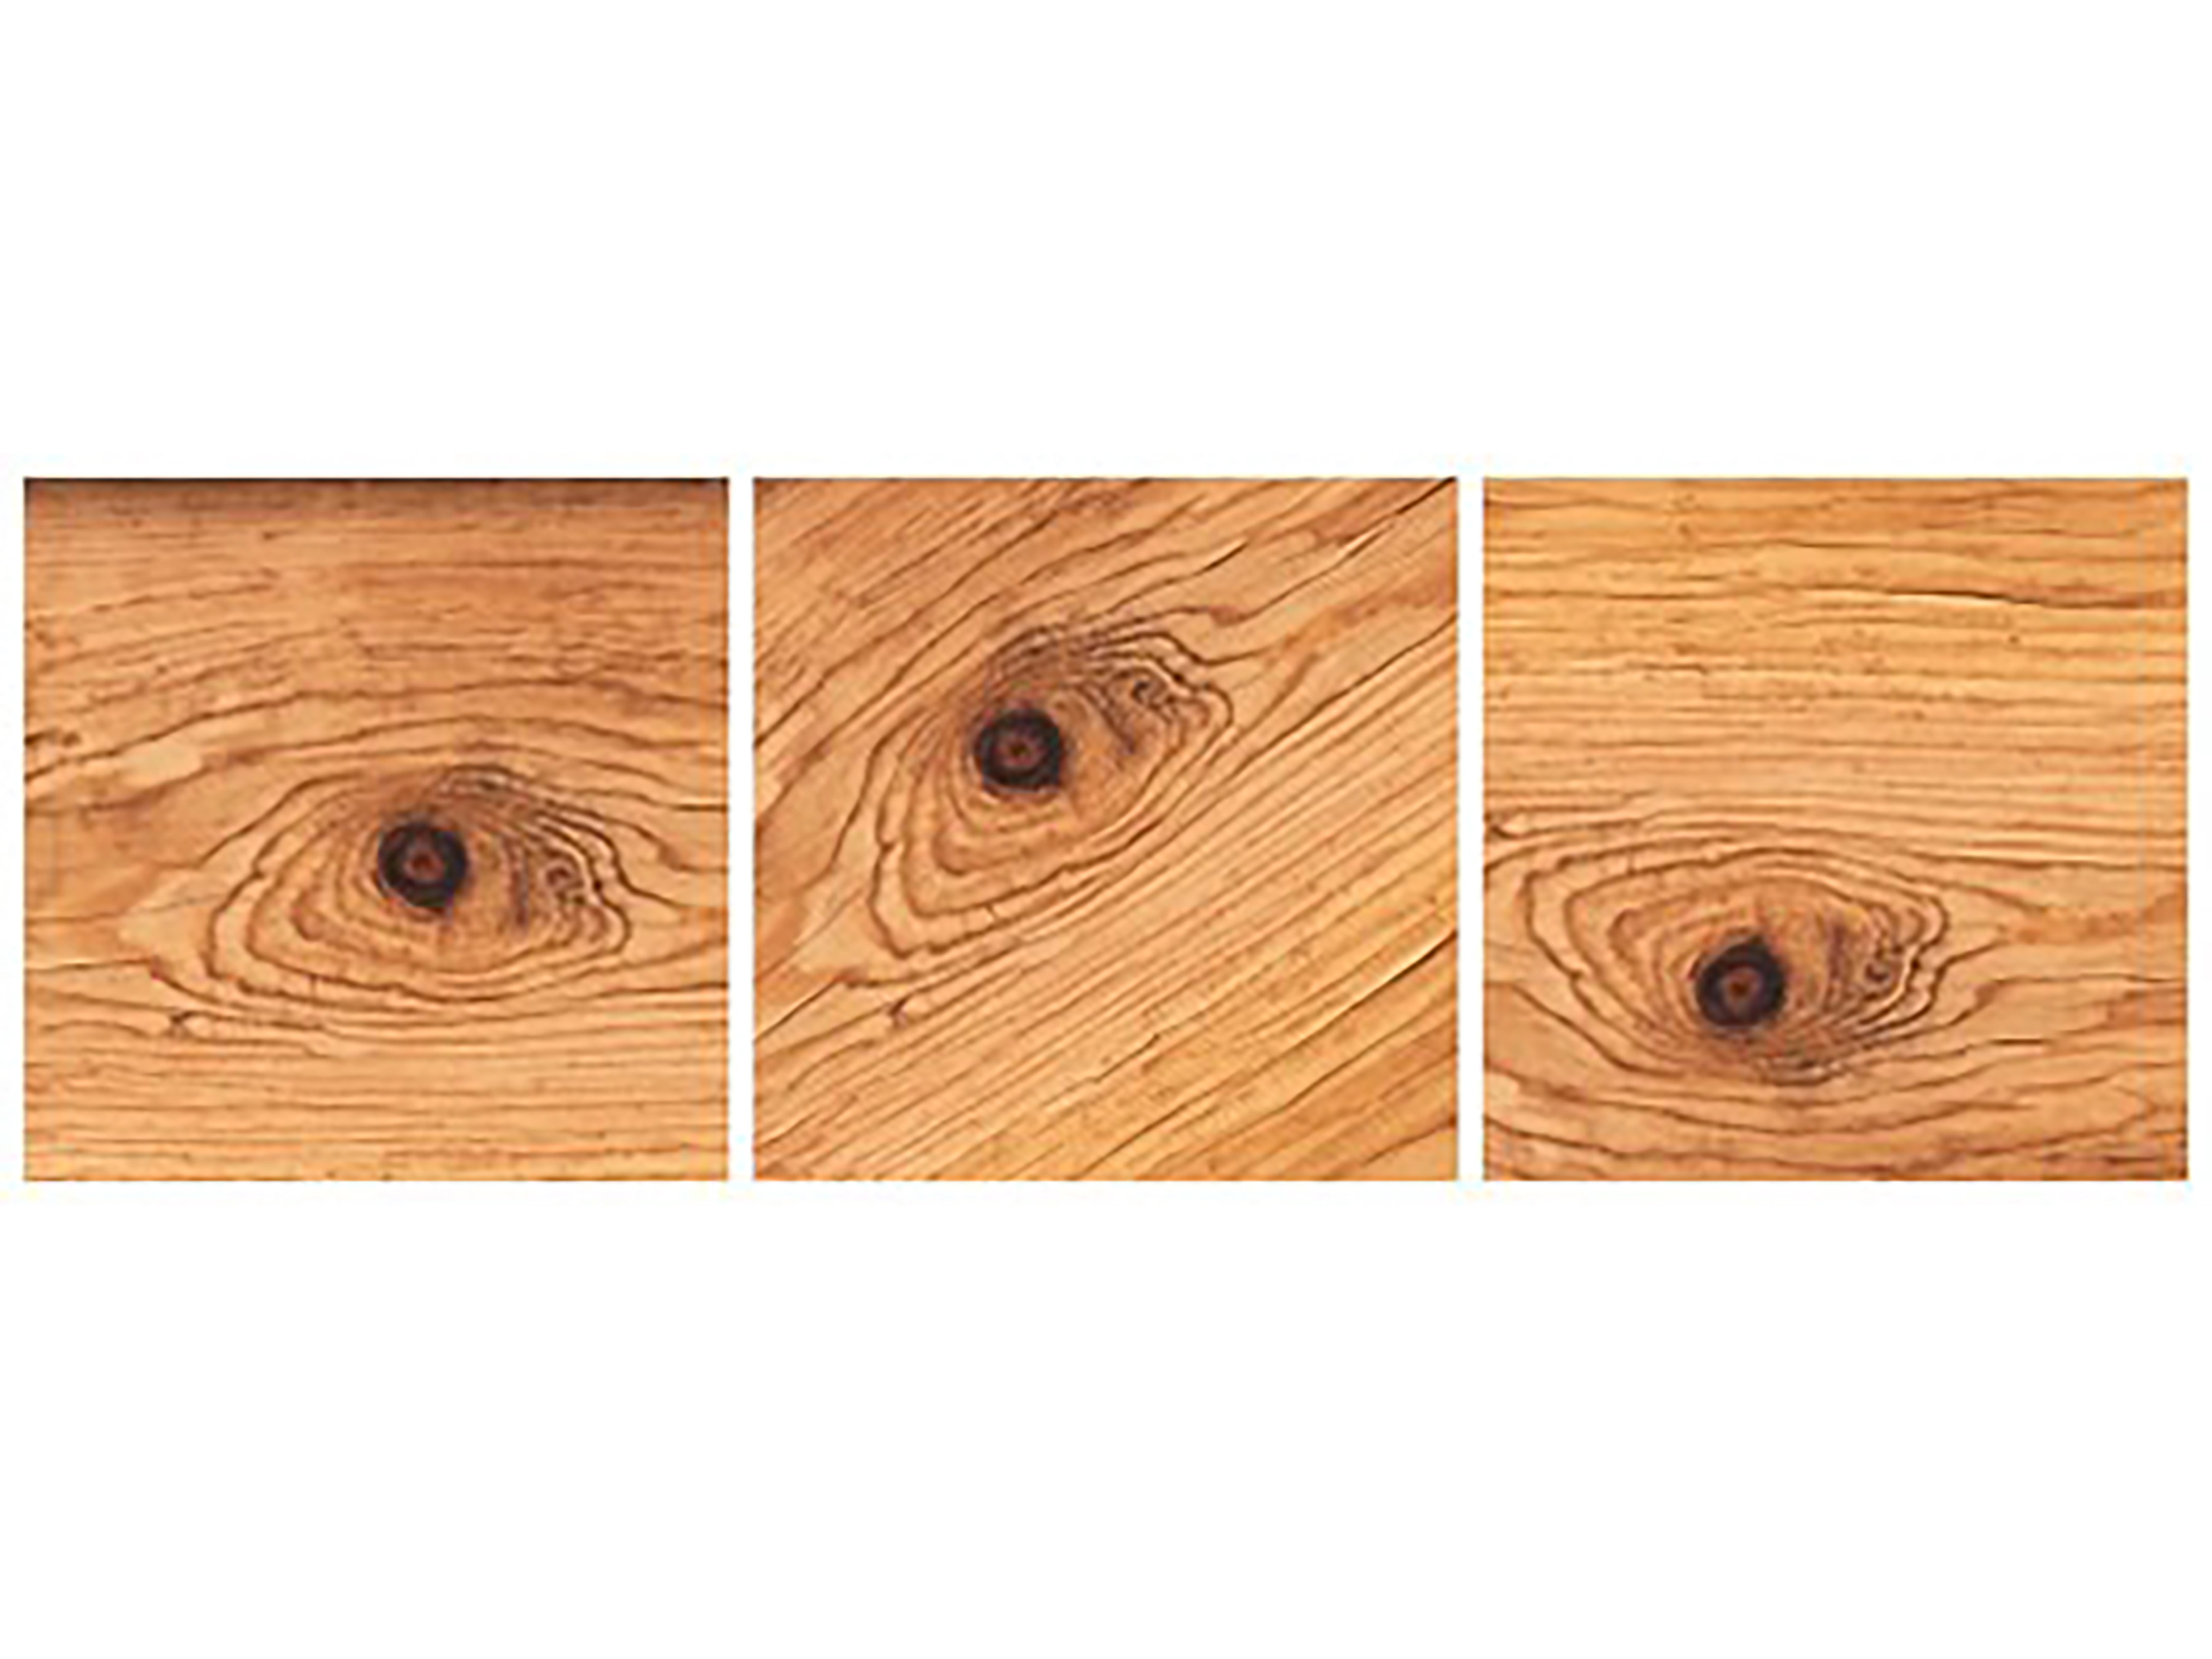 An example of a bad training dataset. The same defect (wood knot) was captured a couple of time, with only its rotation or positioning slightly changed. To teach a deep learning model to identify such defect, training dataset must include images of many different types of wood knots.